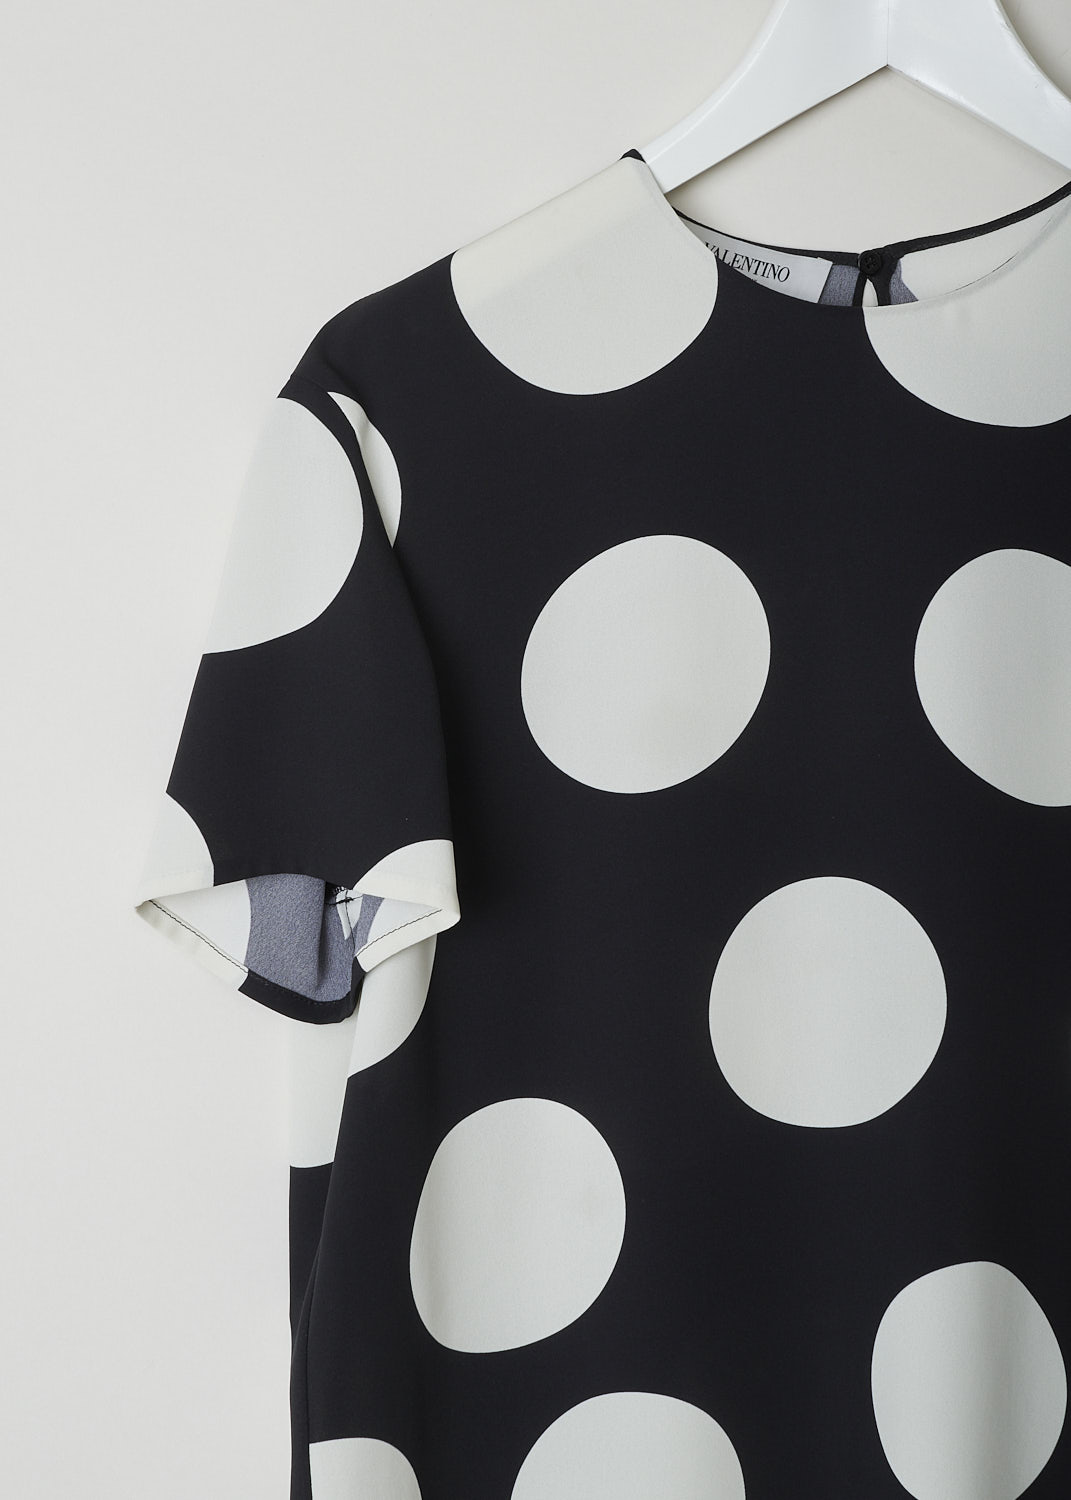 VALENTINO, BLACK TOP WITH BIG WHITE DOTS, VB3AE5P5661_0NA, Black, White, Print, Detail, This boxy silk top has a black base with a big dotted print in white.  The top has a high, round neckline and short sleeves. In the back, a single button with keyhole functions as the closure option. The top has a wider silhouette.
